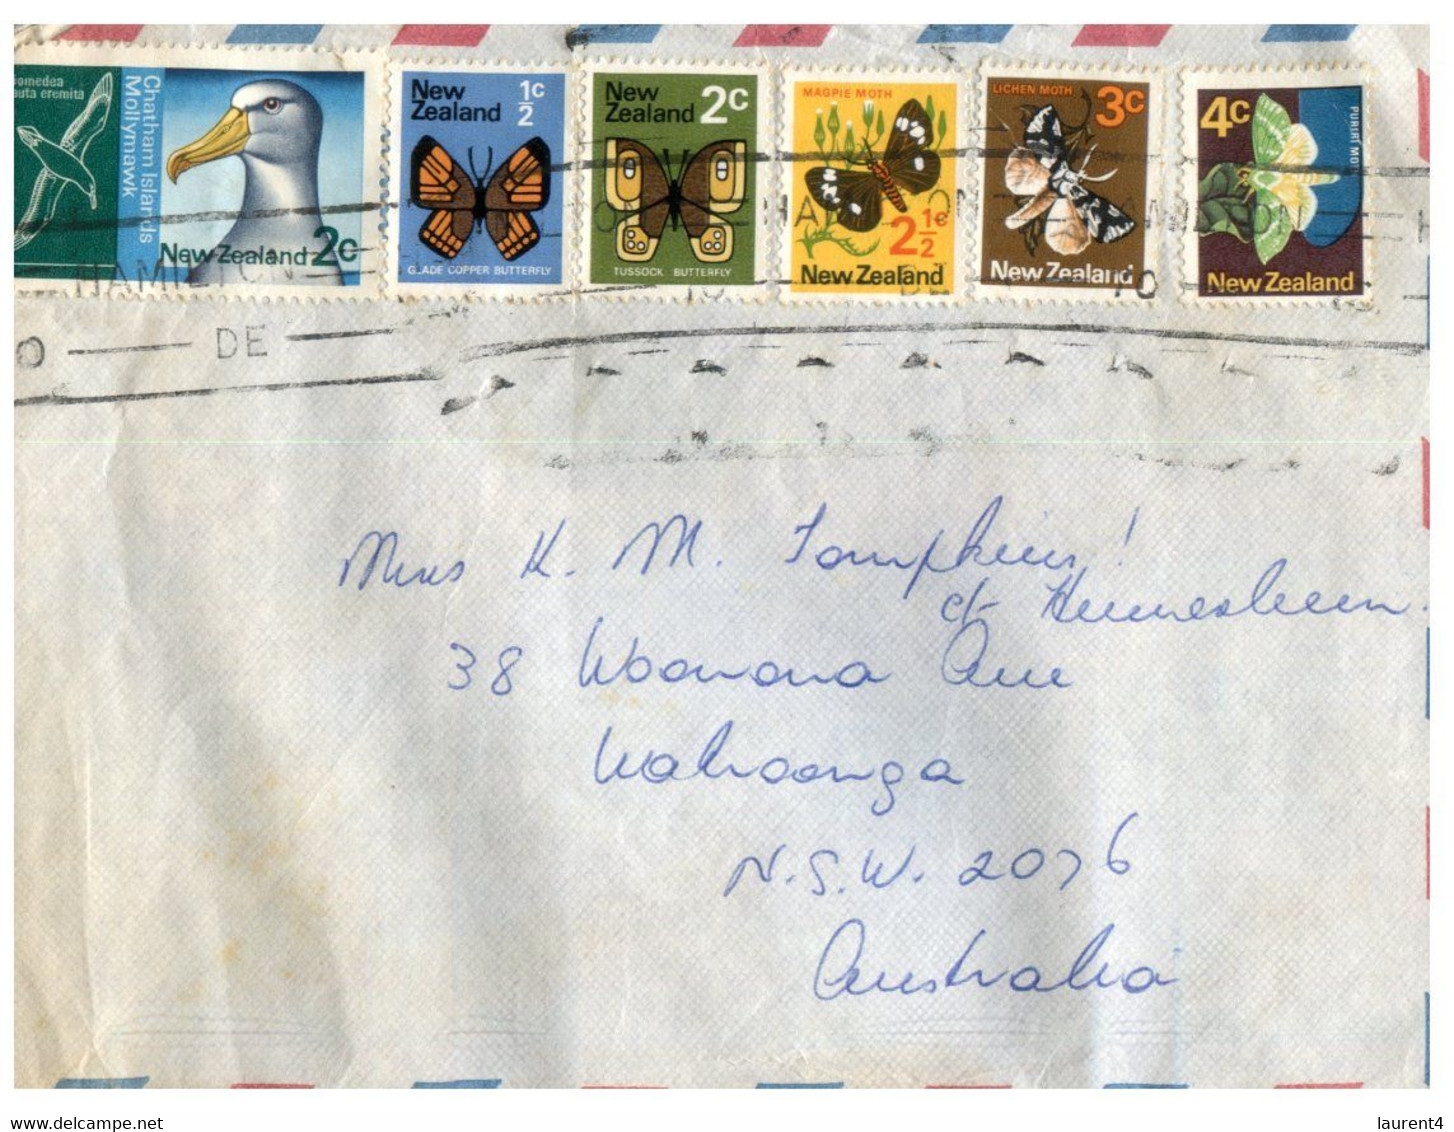 (HH 29) New Zealand FDC Cover Posted To Australia - With Many Butterfly Stamps... (early 1970s ?) - Storia Postale